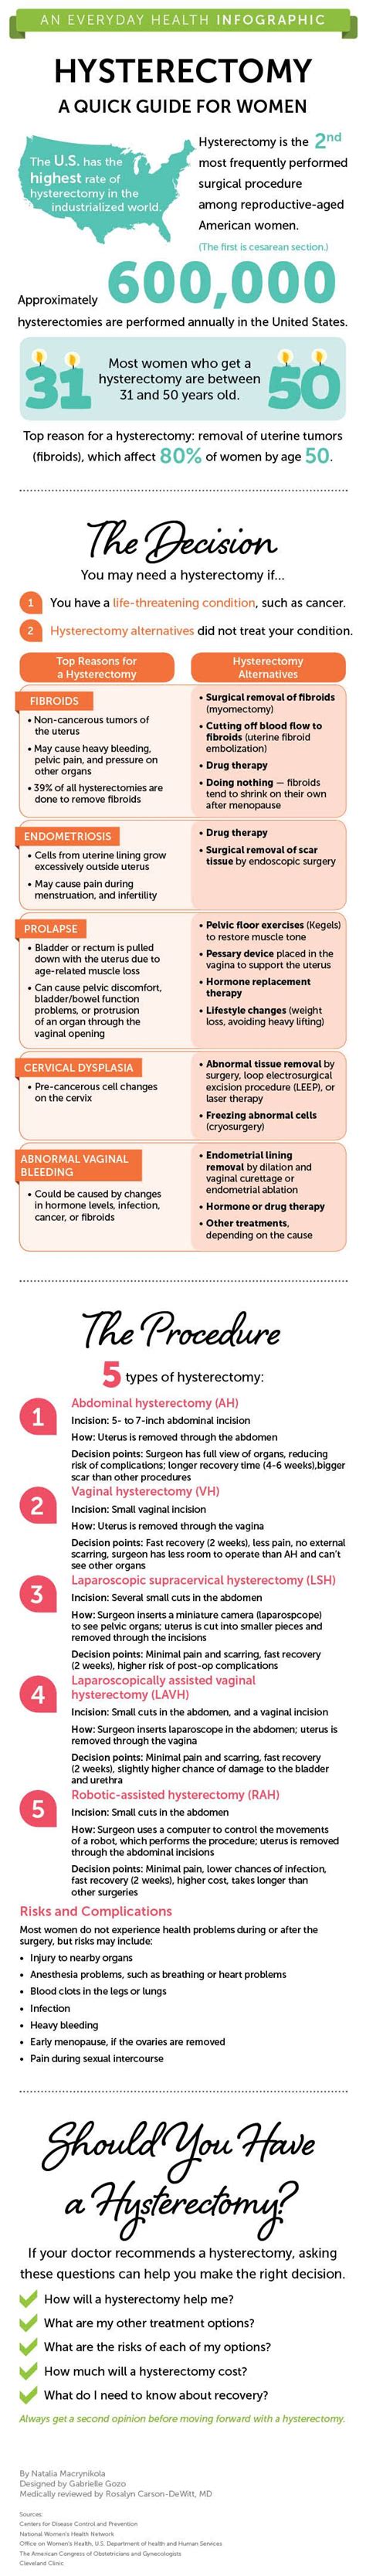 22 best hysterectomy recovery images on pinterest endometriosis recovery and surgery recovery